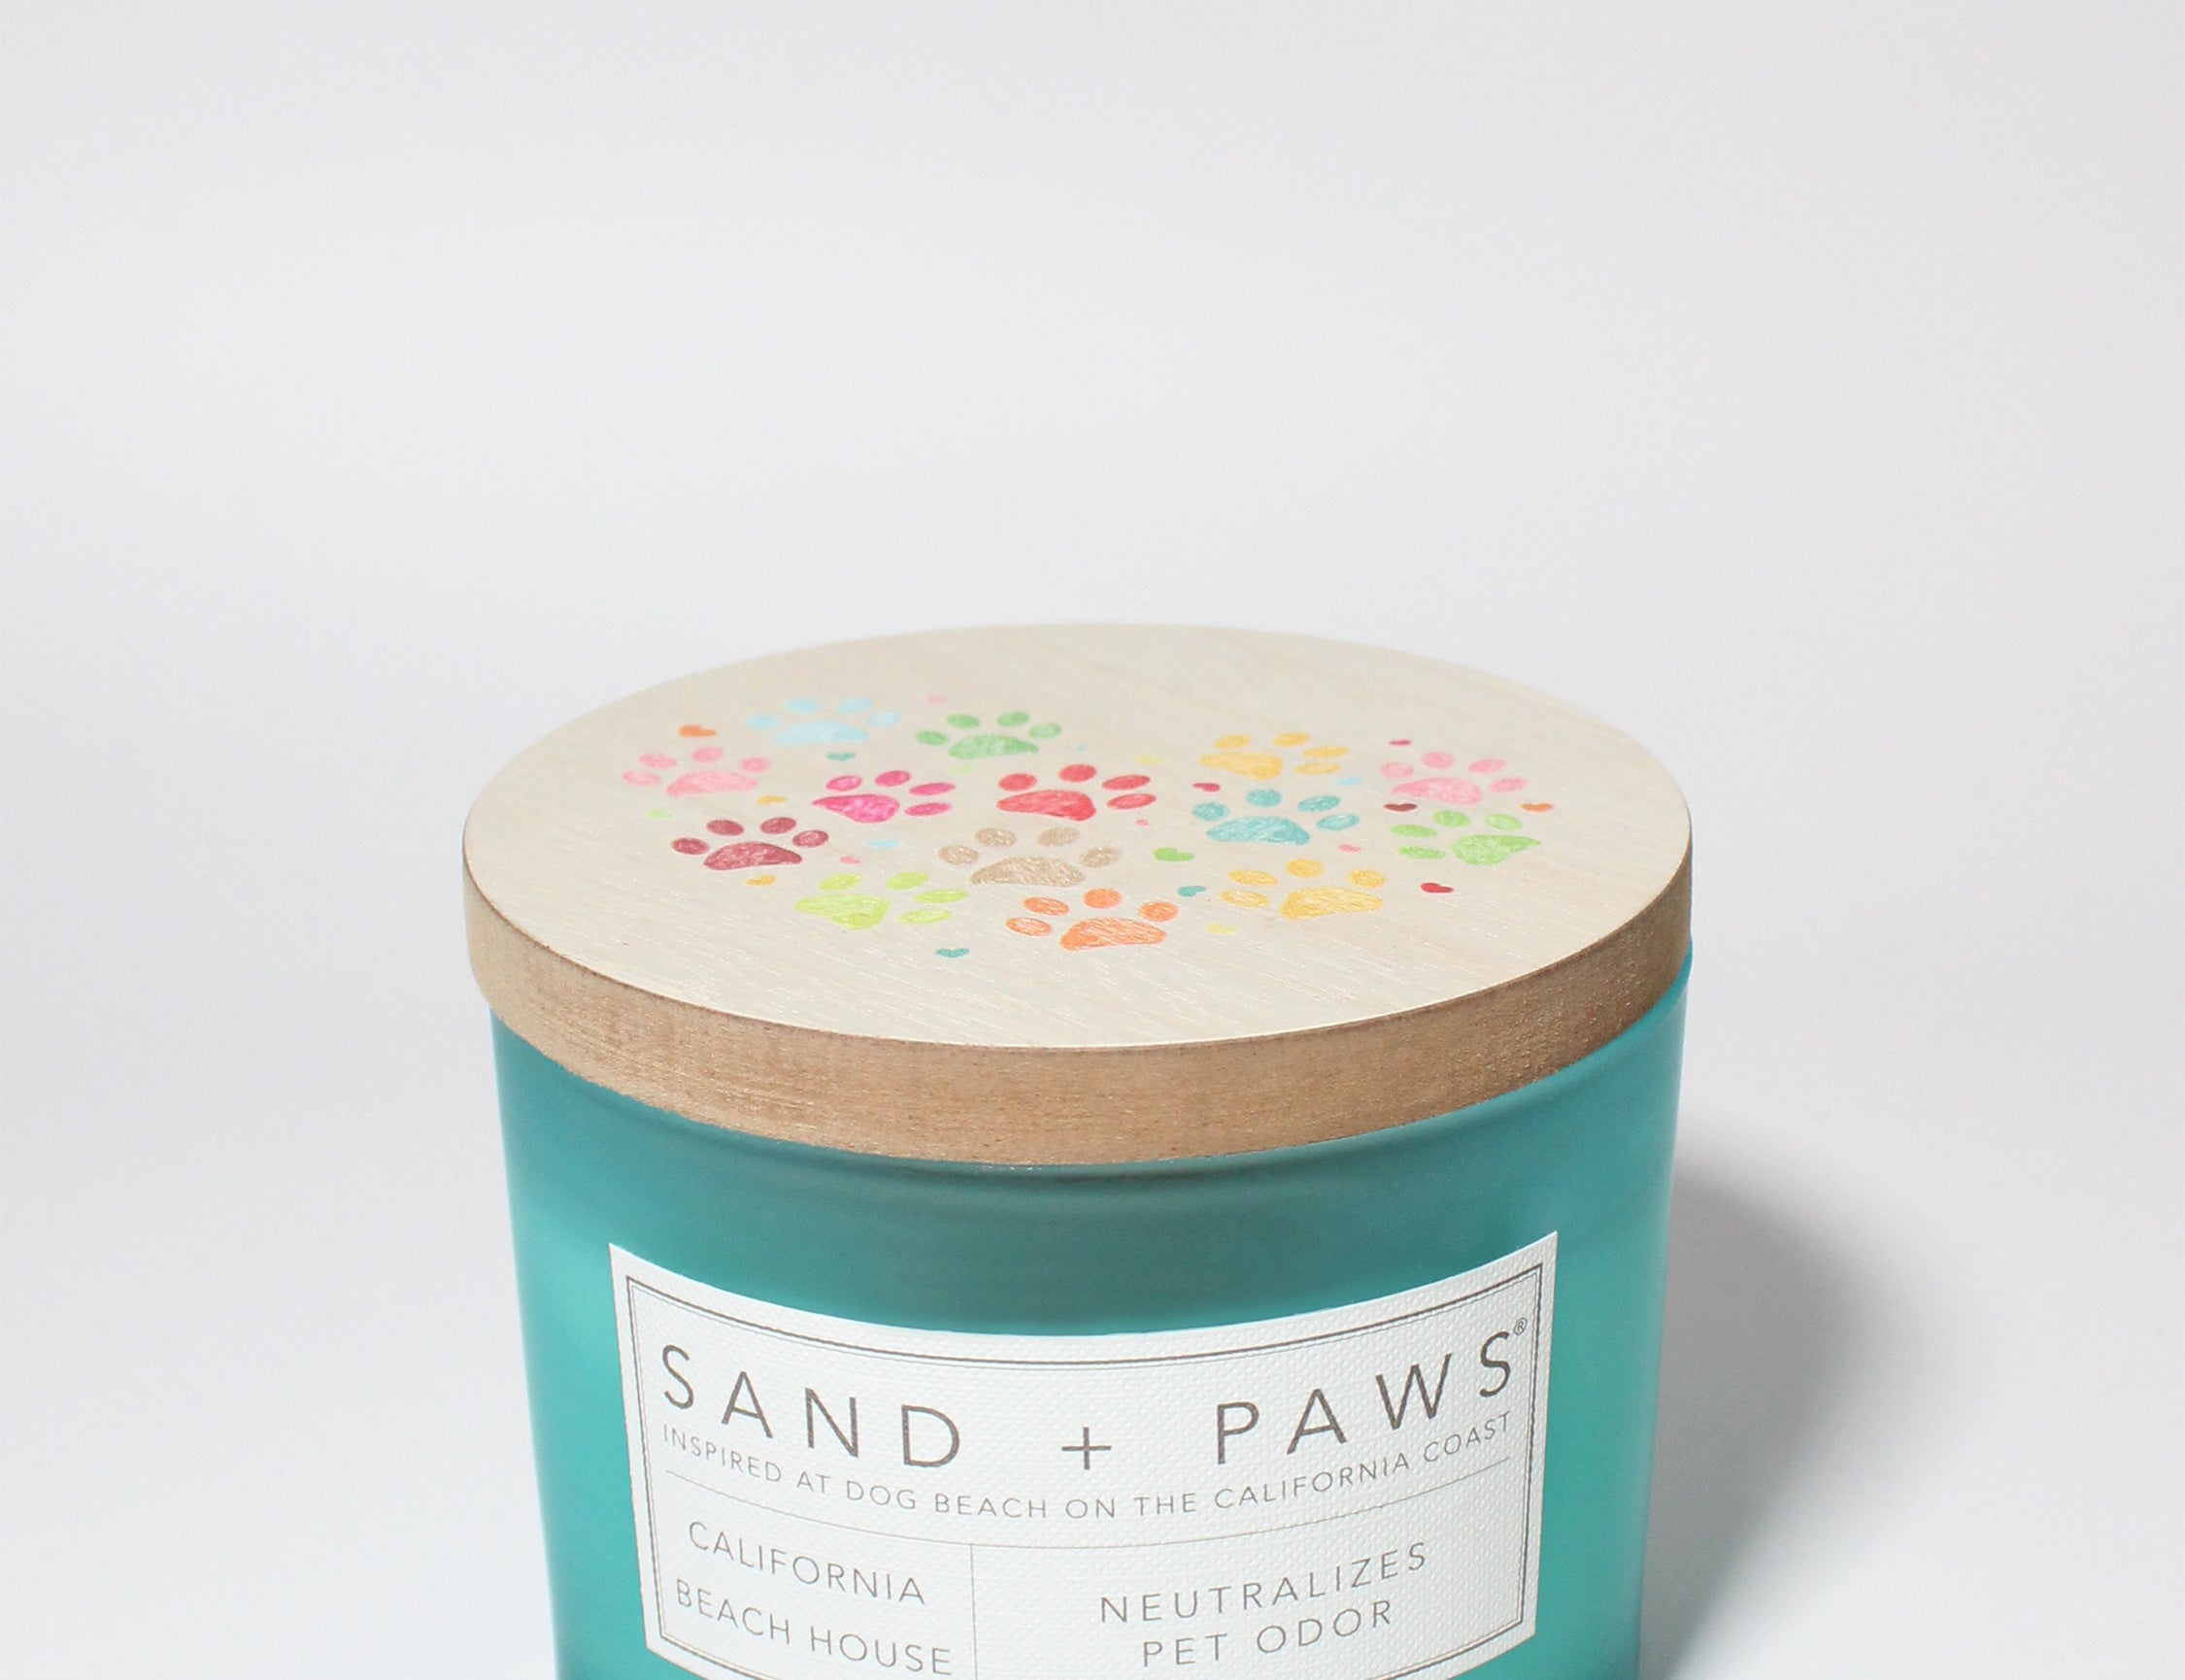 Sand + Paws California Beach House 12 oz scented candle Coast vessel with Painted Colorful Paw Prints in Heart Shape lid